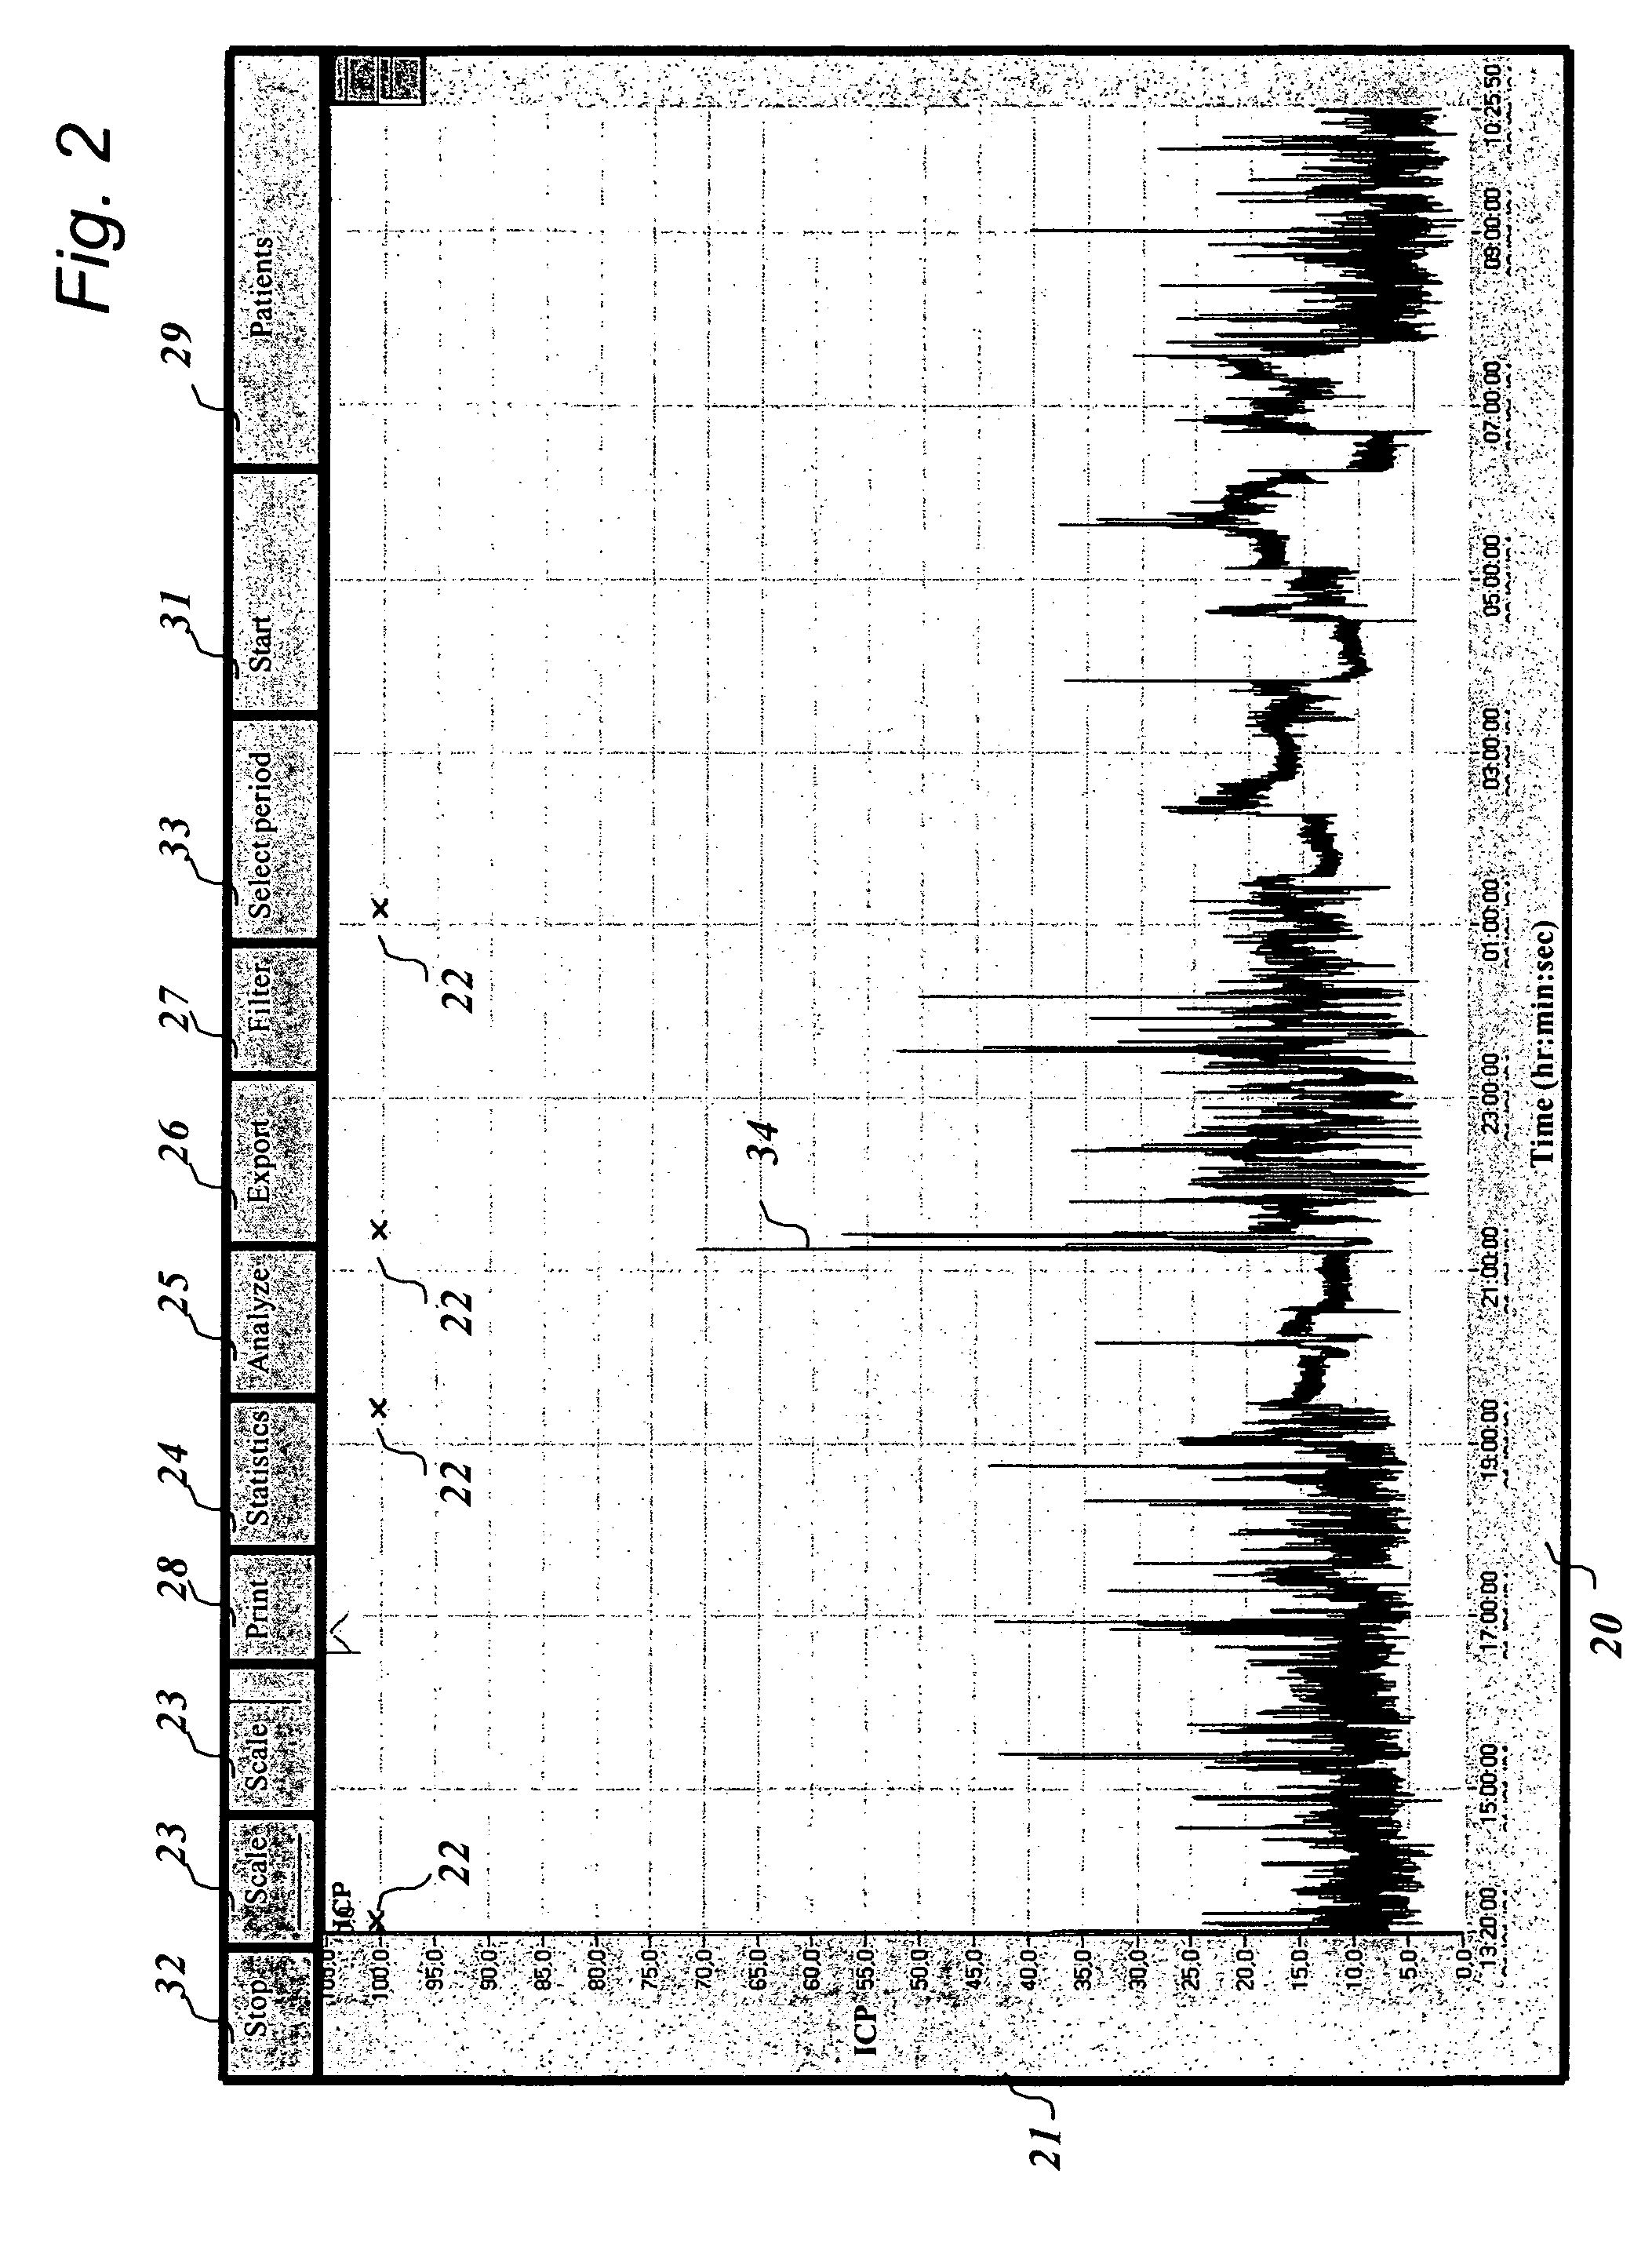 System for performing an analysis of pressure-signals derivable from pressure measurements on or in a body